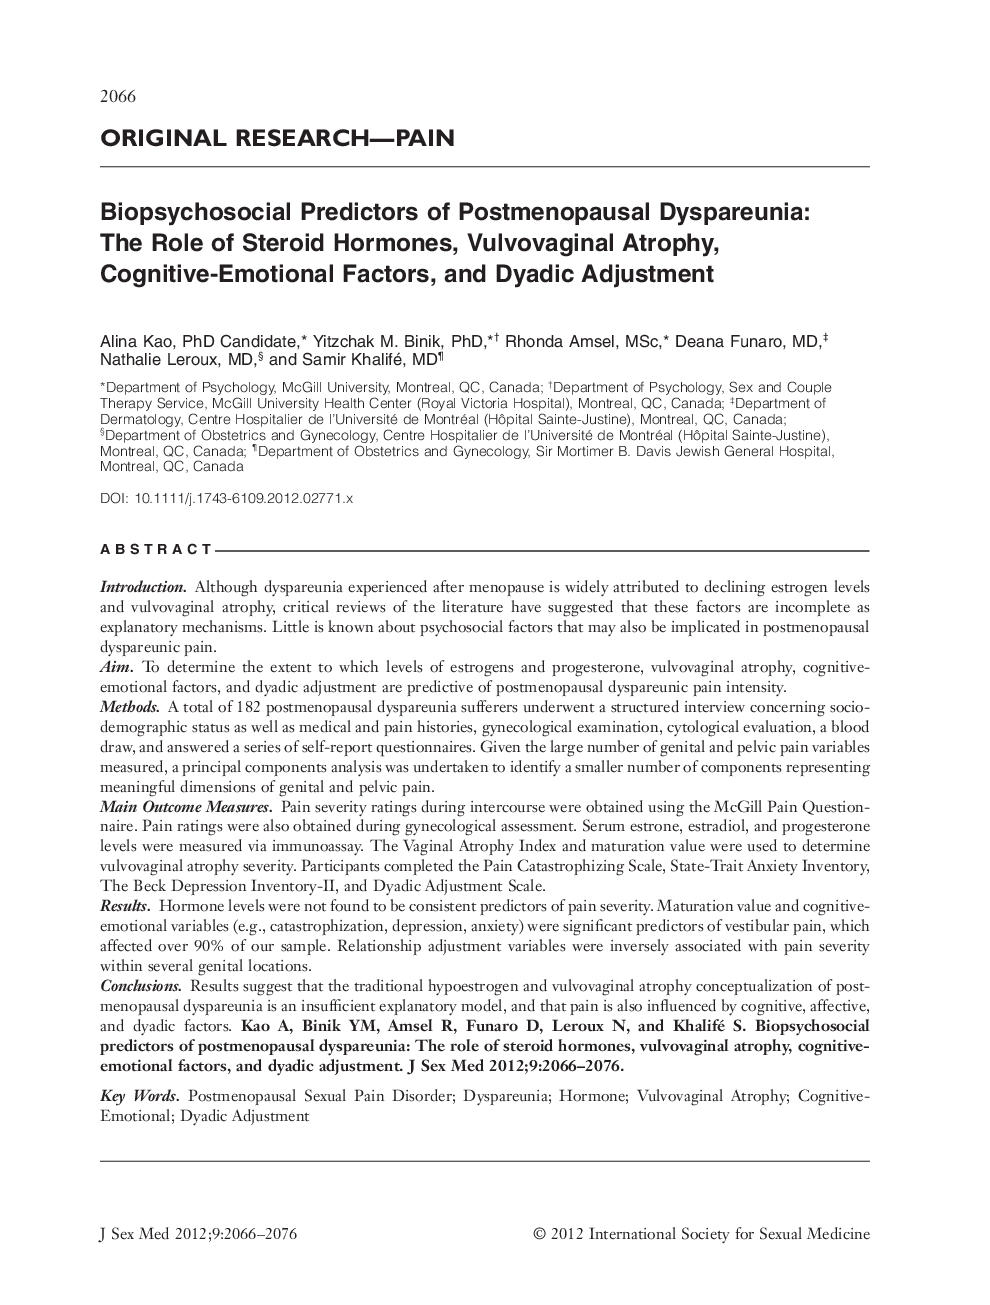 Biopsychosocial Predictors of Postmenopausal Dyspareunia: The Role of Steroid Hormones, Vulvovaginal Atrophy, Cognitive‐Emotional Factors, and Dyadic Adjustment